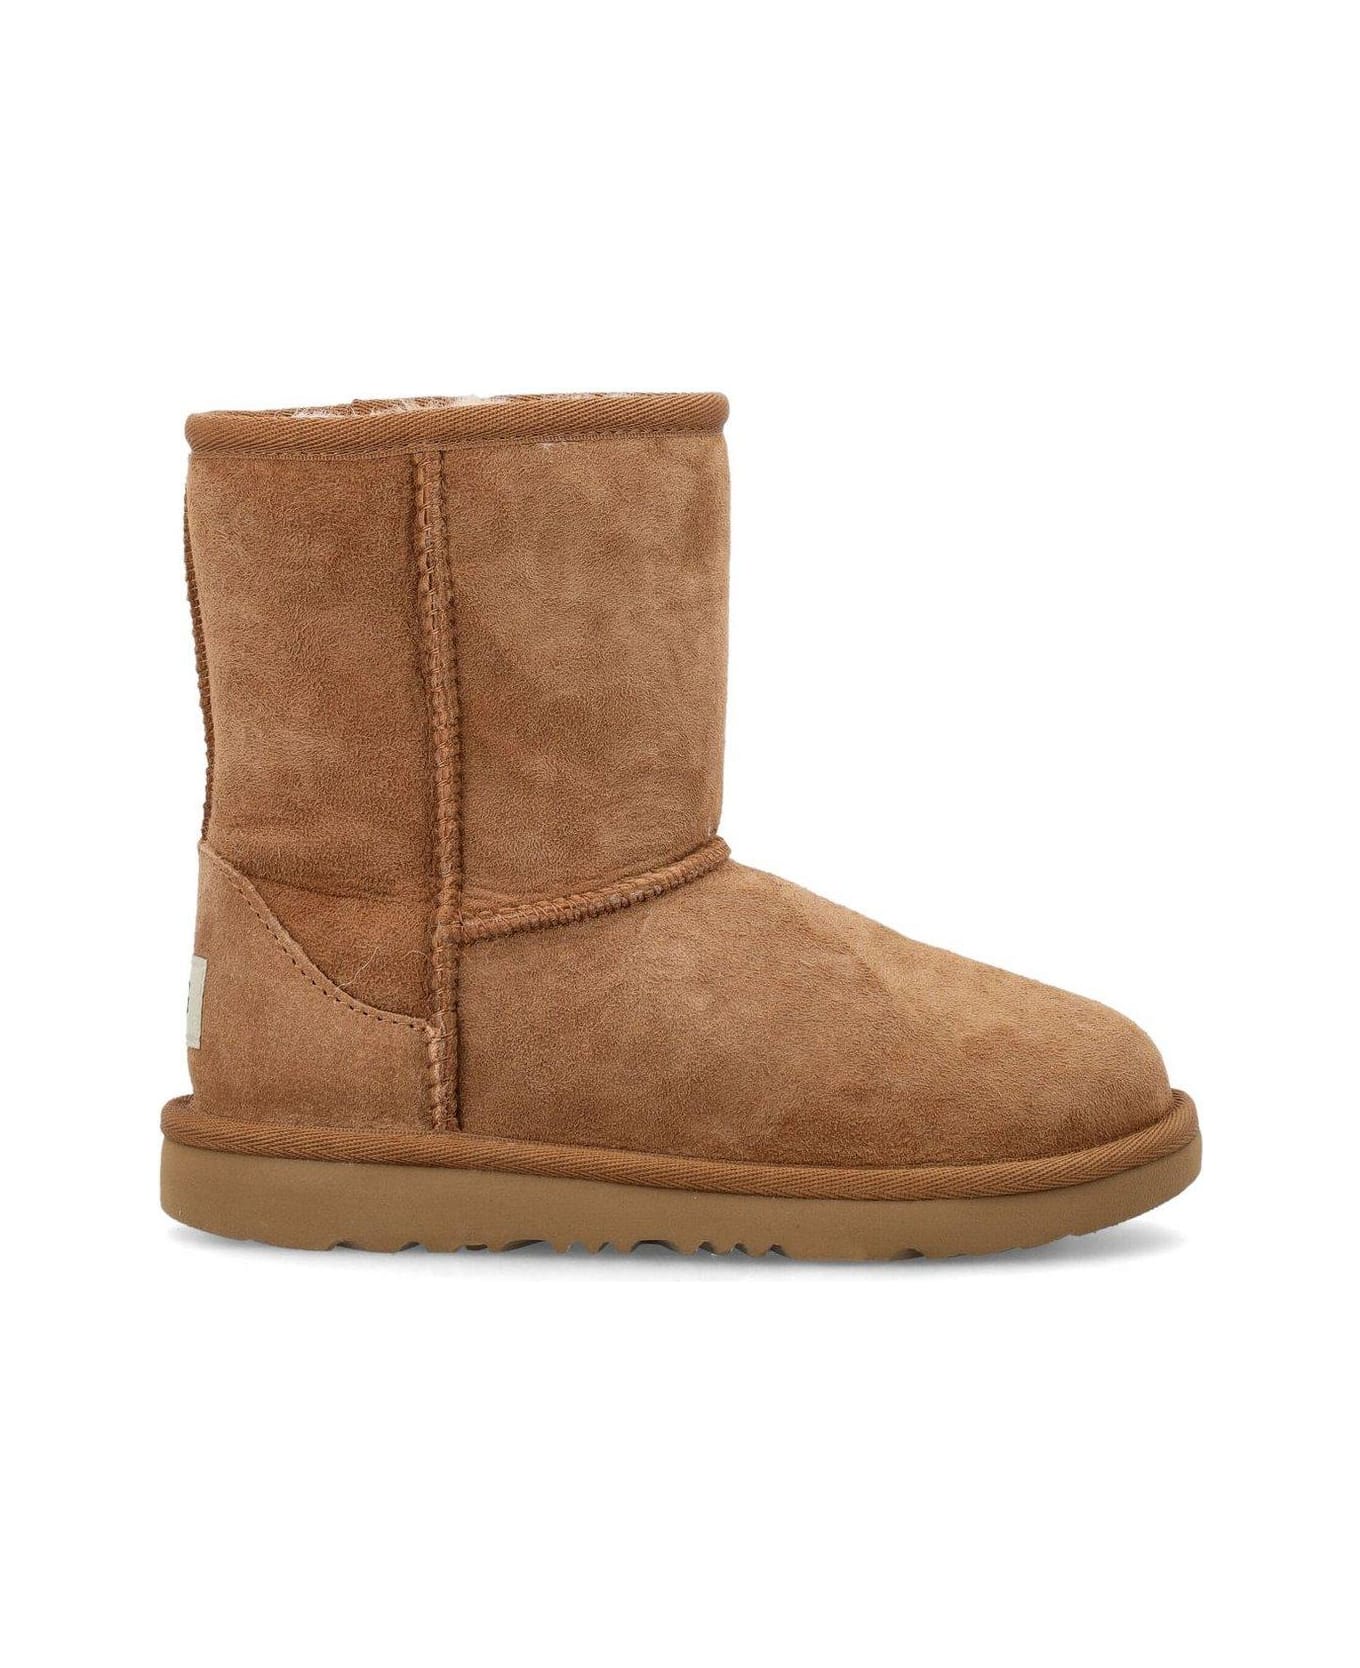 UGG Classic Ankle Boots - BROWN